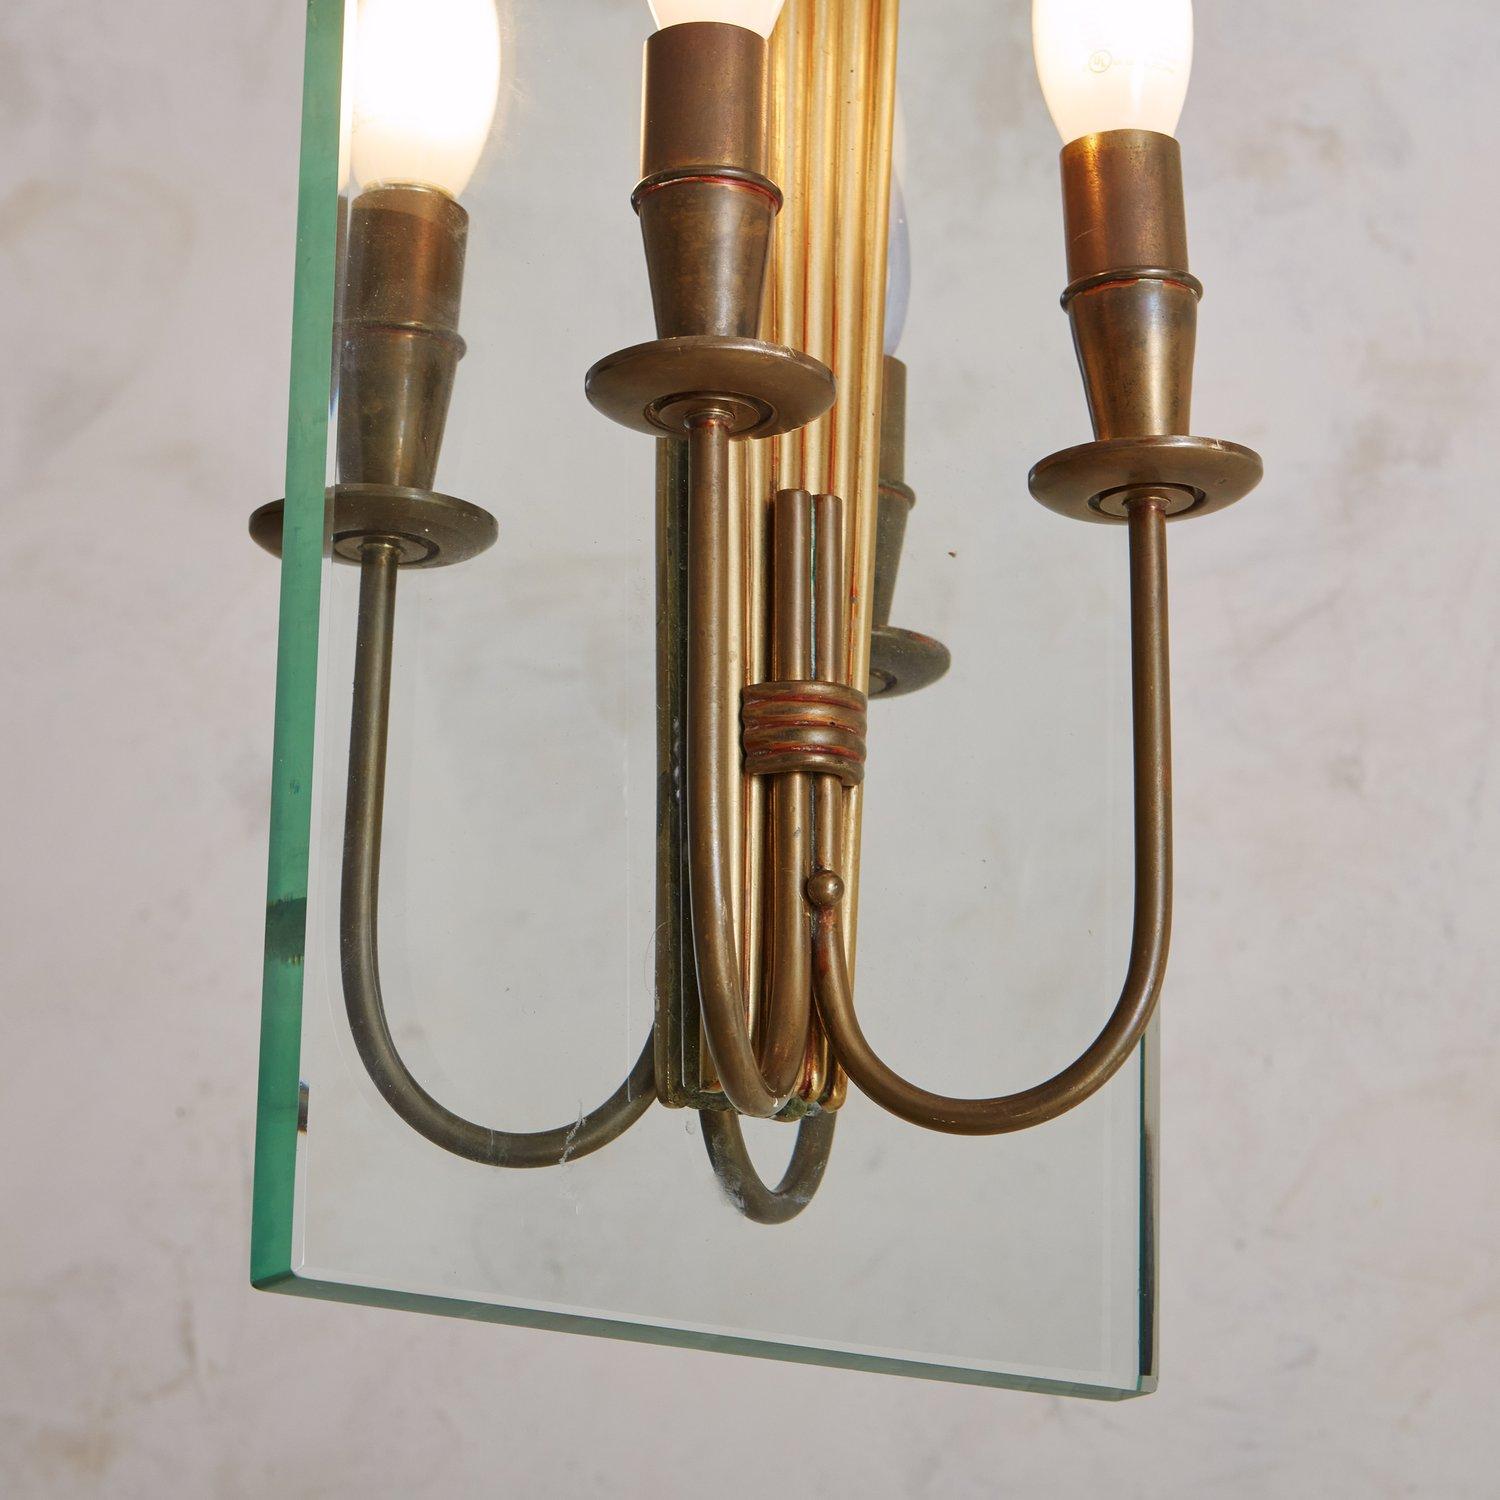 Brass + Glass Pendant Light in the Style of Fontana Arte, 20th Century For Sale 2